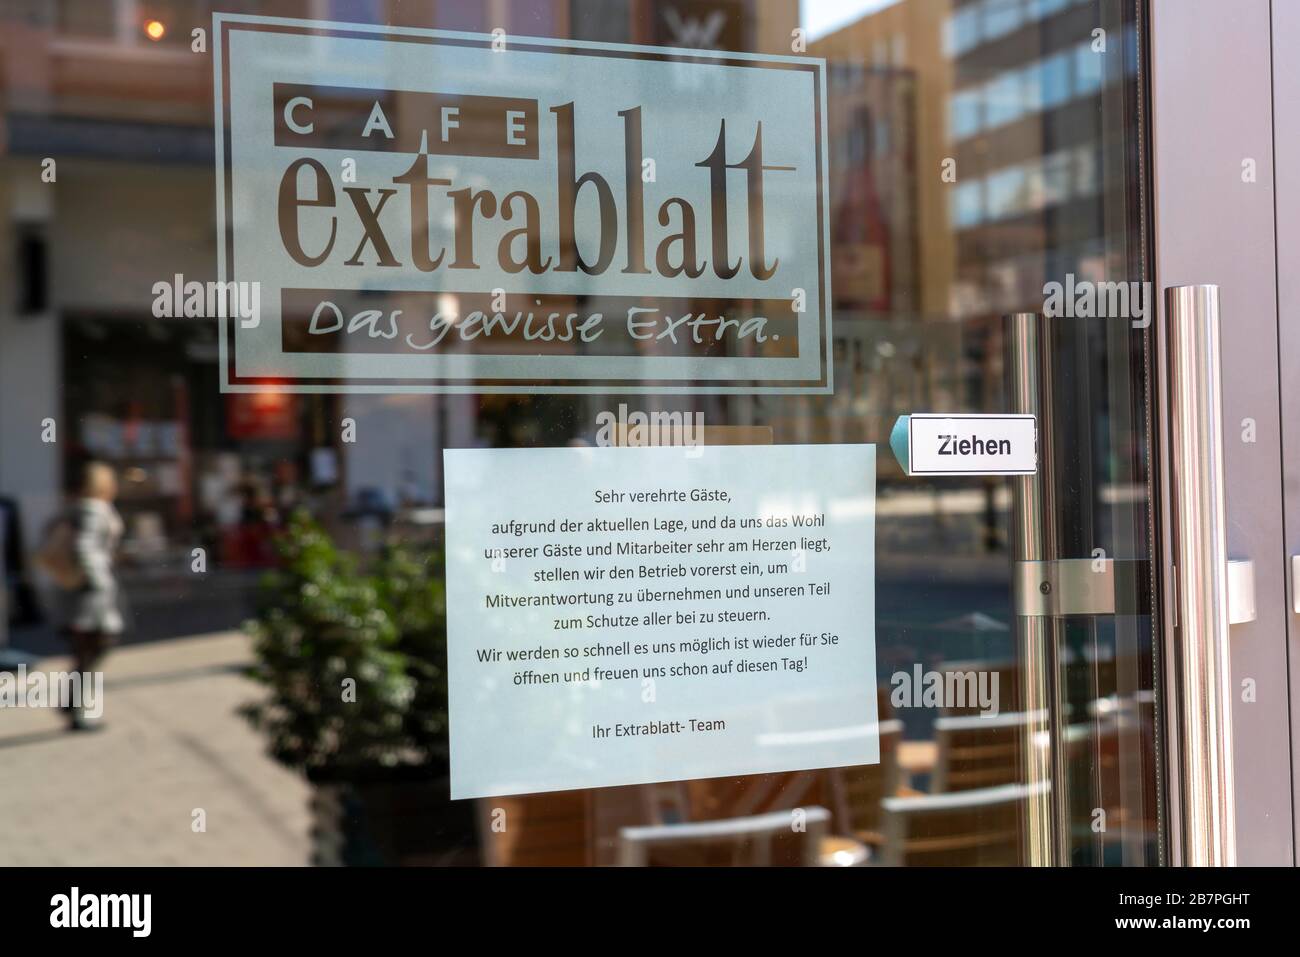 Effects of the Coronavirus Pandemic in Germany, Essen, closed Caf, Cafe Extrablatt, Stock Photo